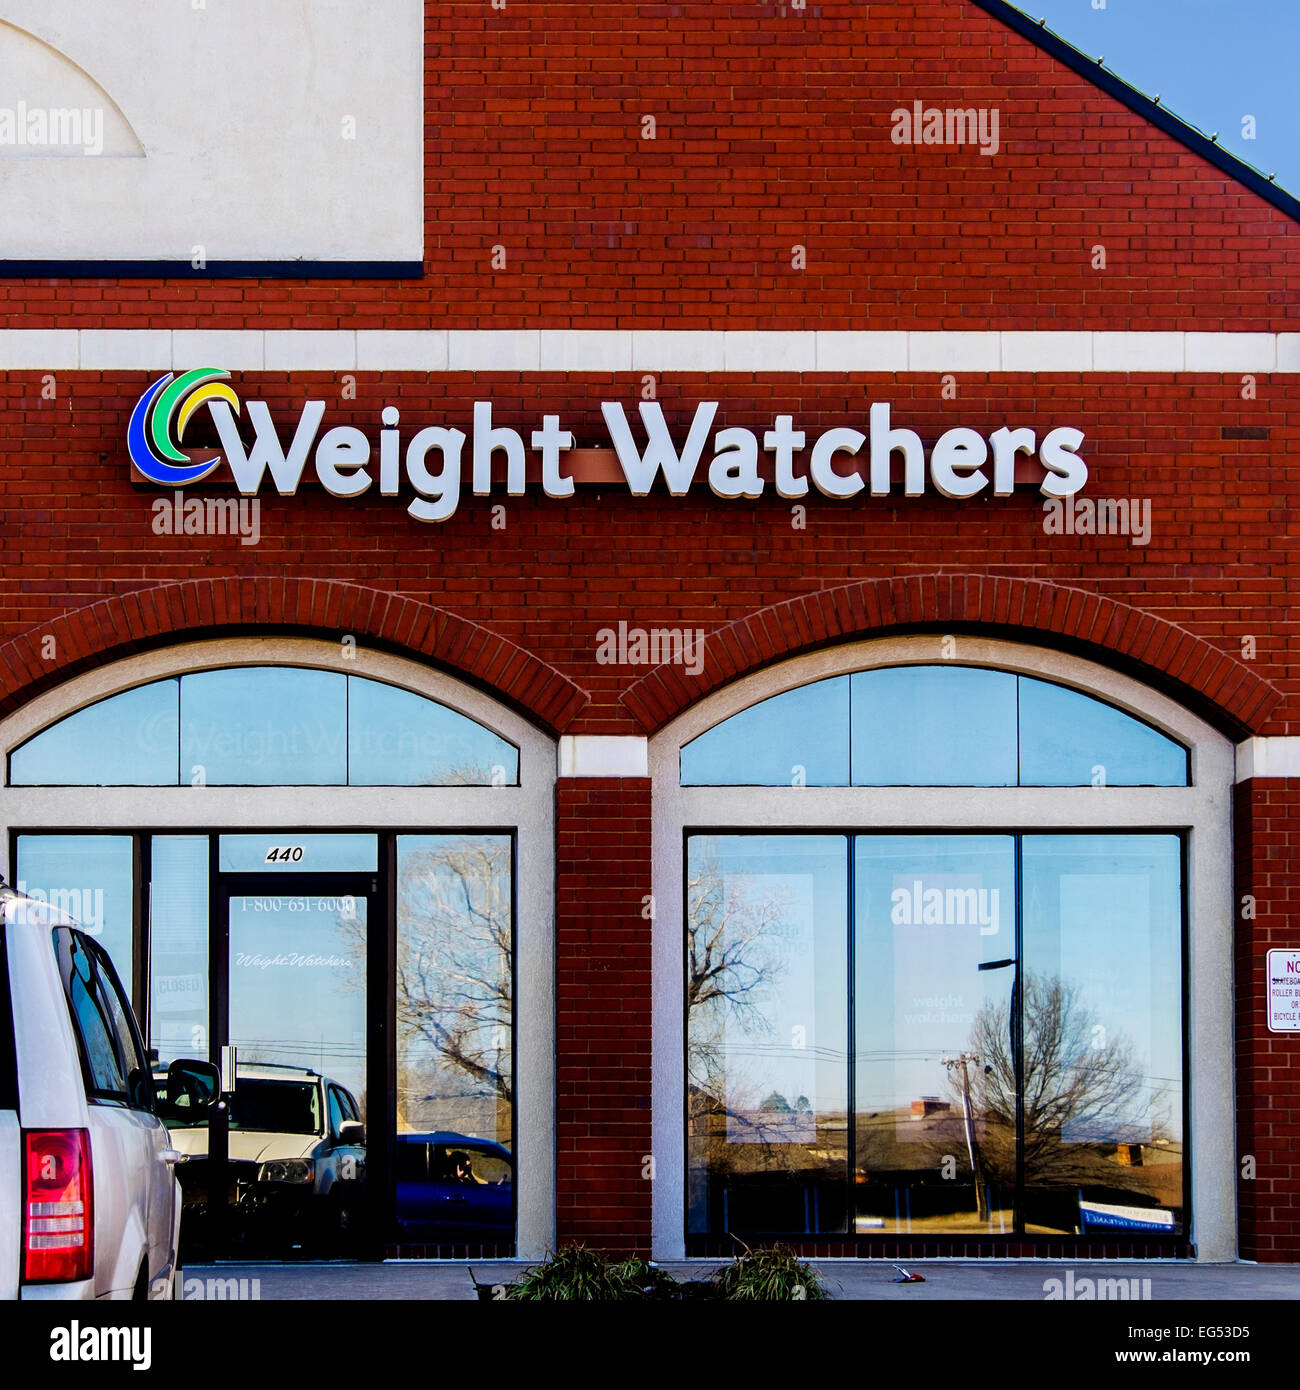 The exterior of a Weight Watchers franchise building in Oklahoma City, Oklahoma, USA. Stock Photo